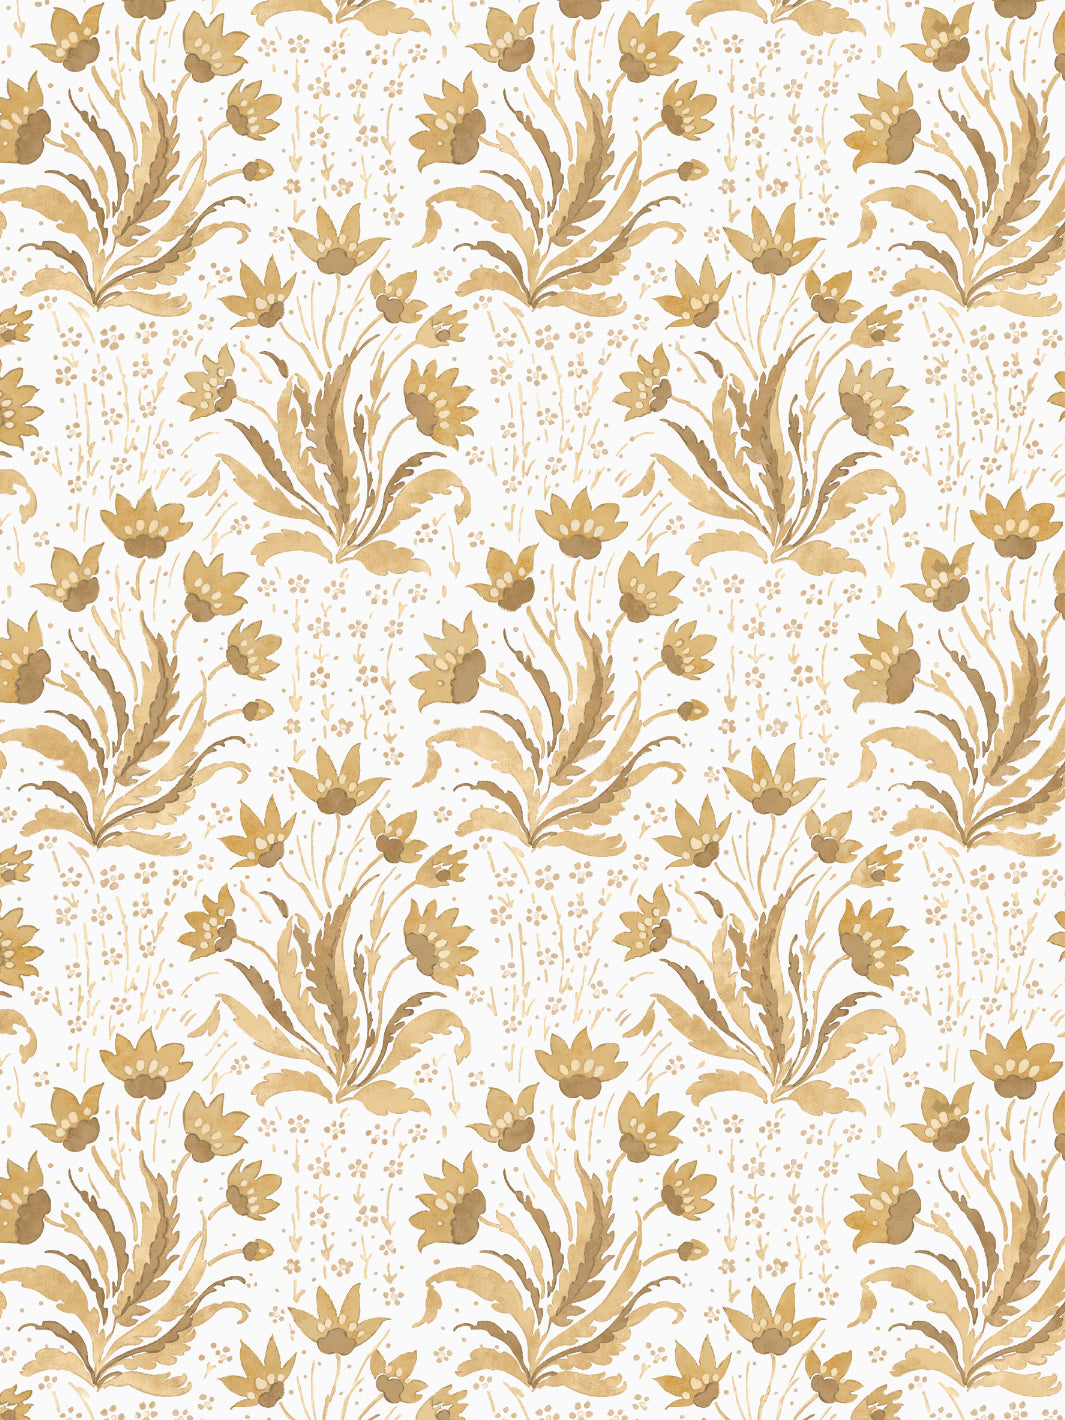 'Hillhouse Floral Tonal' Wallpaper by Nathan Turner - Mustard